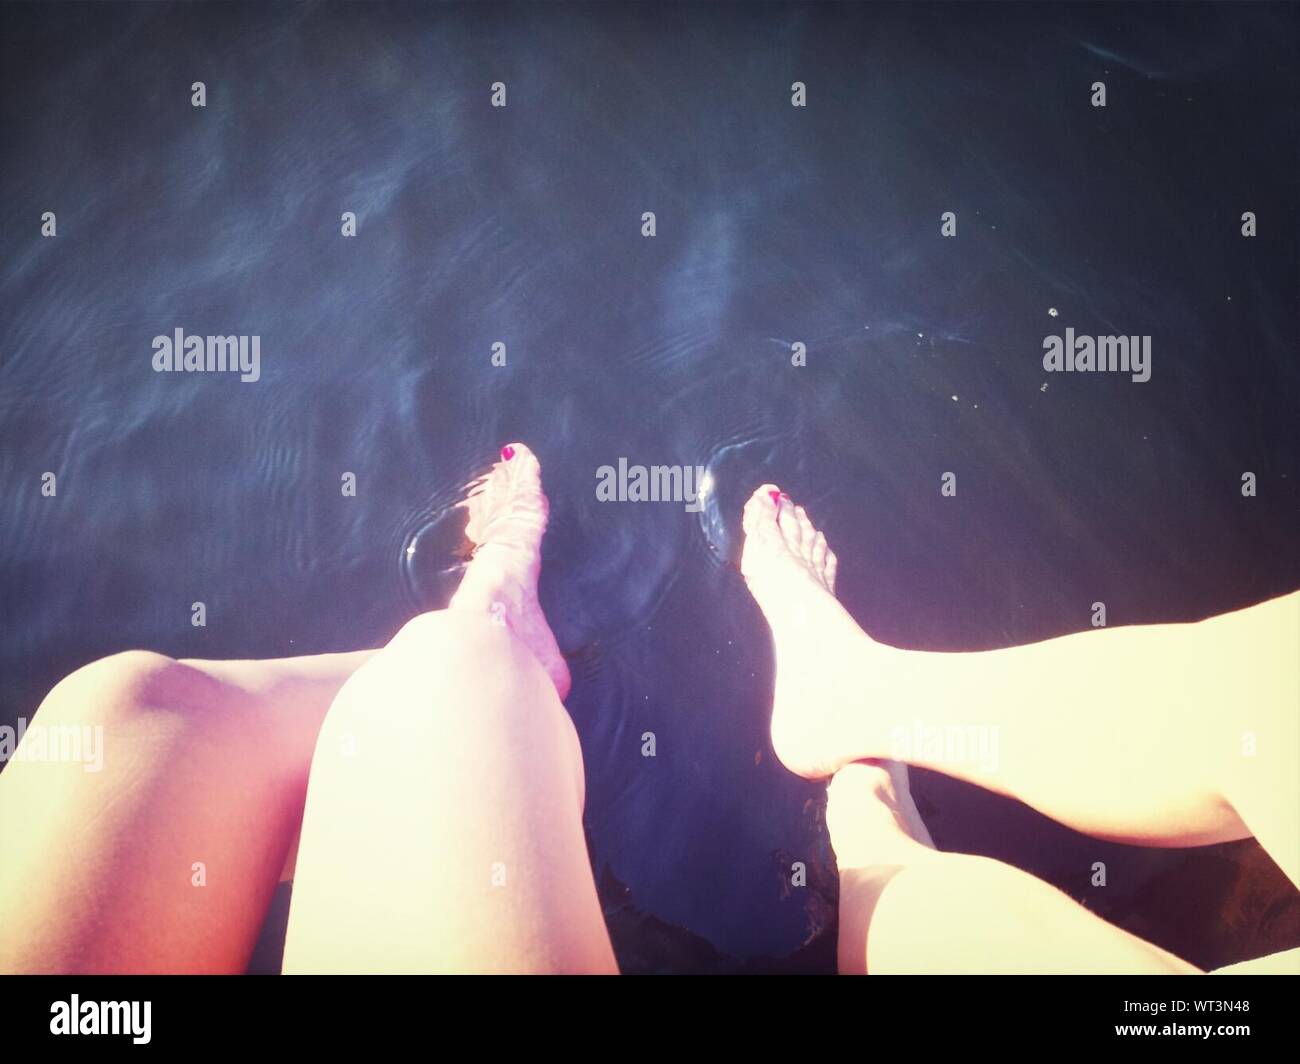 Two Women Wetting Their Legs In Waters Stock Photo